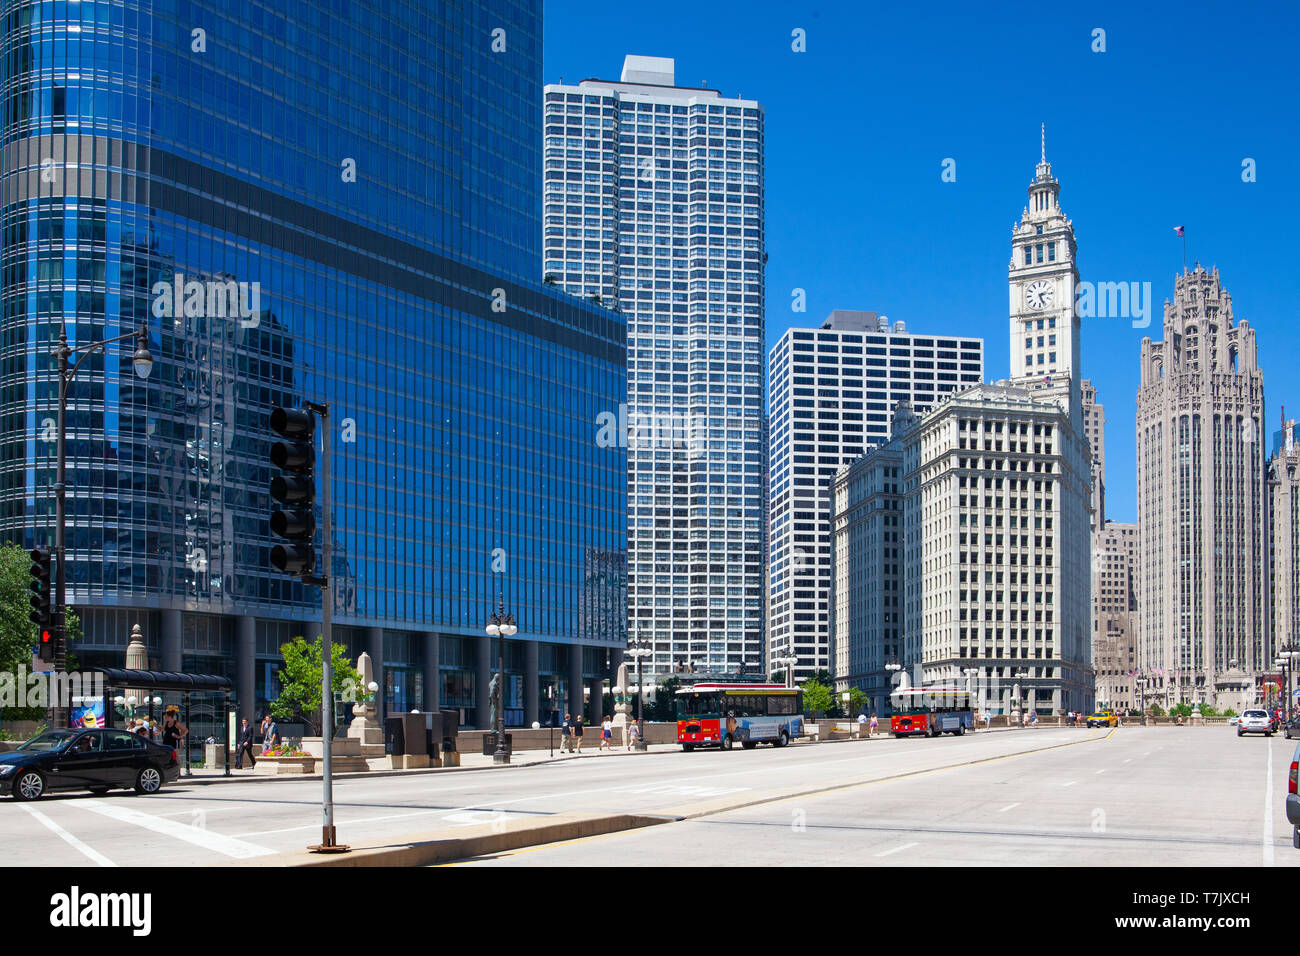 Chicago, IL, USA - July 13,2013:  Wrigley building in Chicago on July 13, 2013. The Wrigley Building is a skyscraper  with two towers (South Tower and Stock Photo